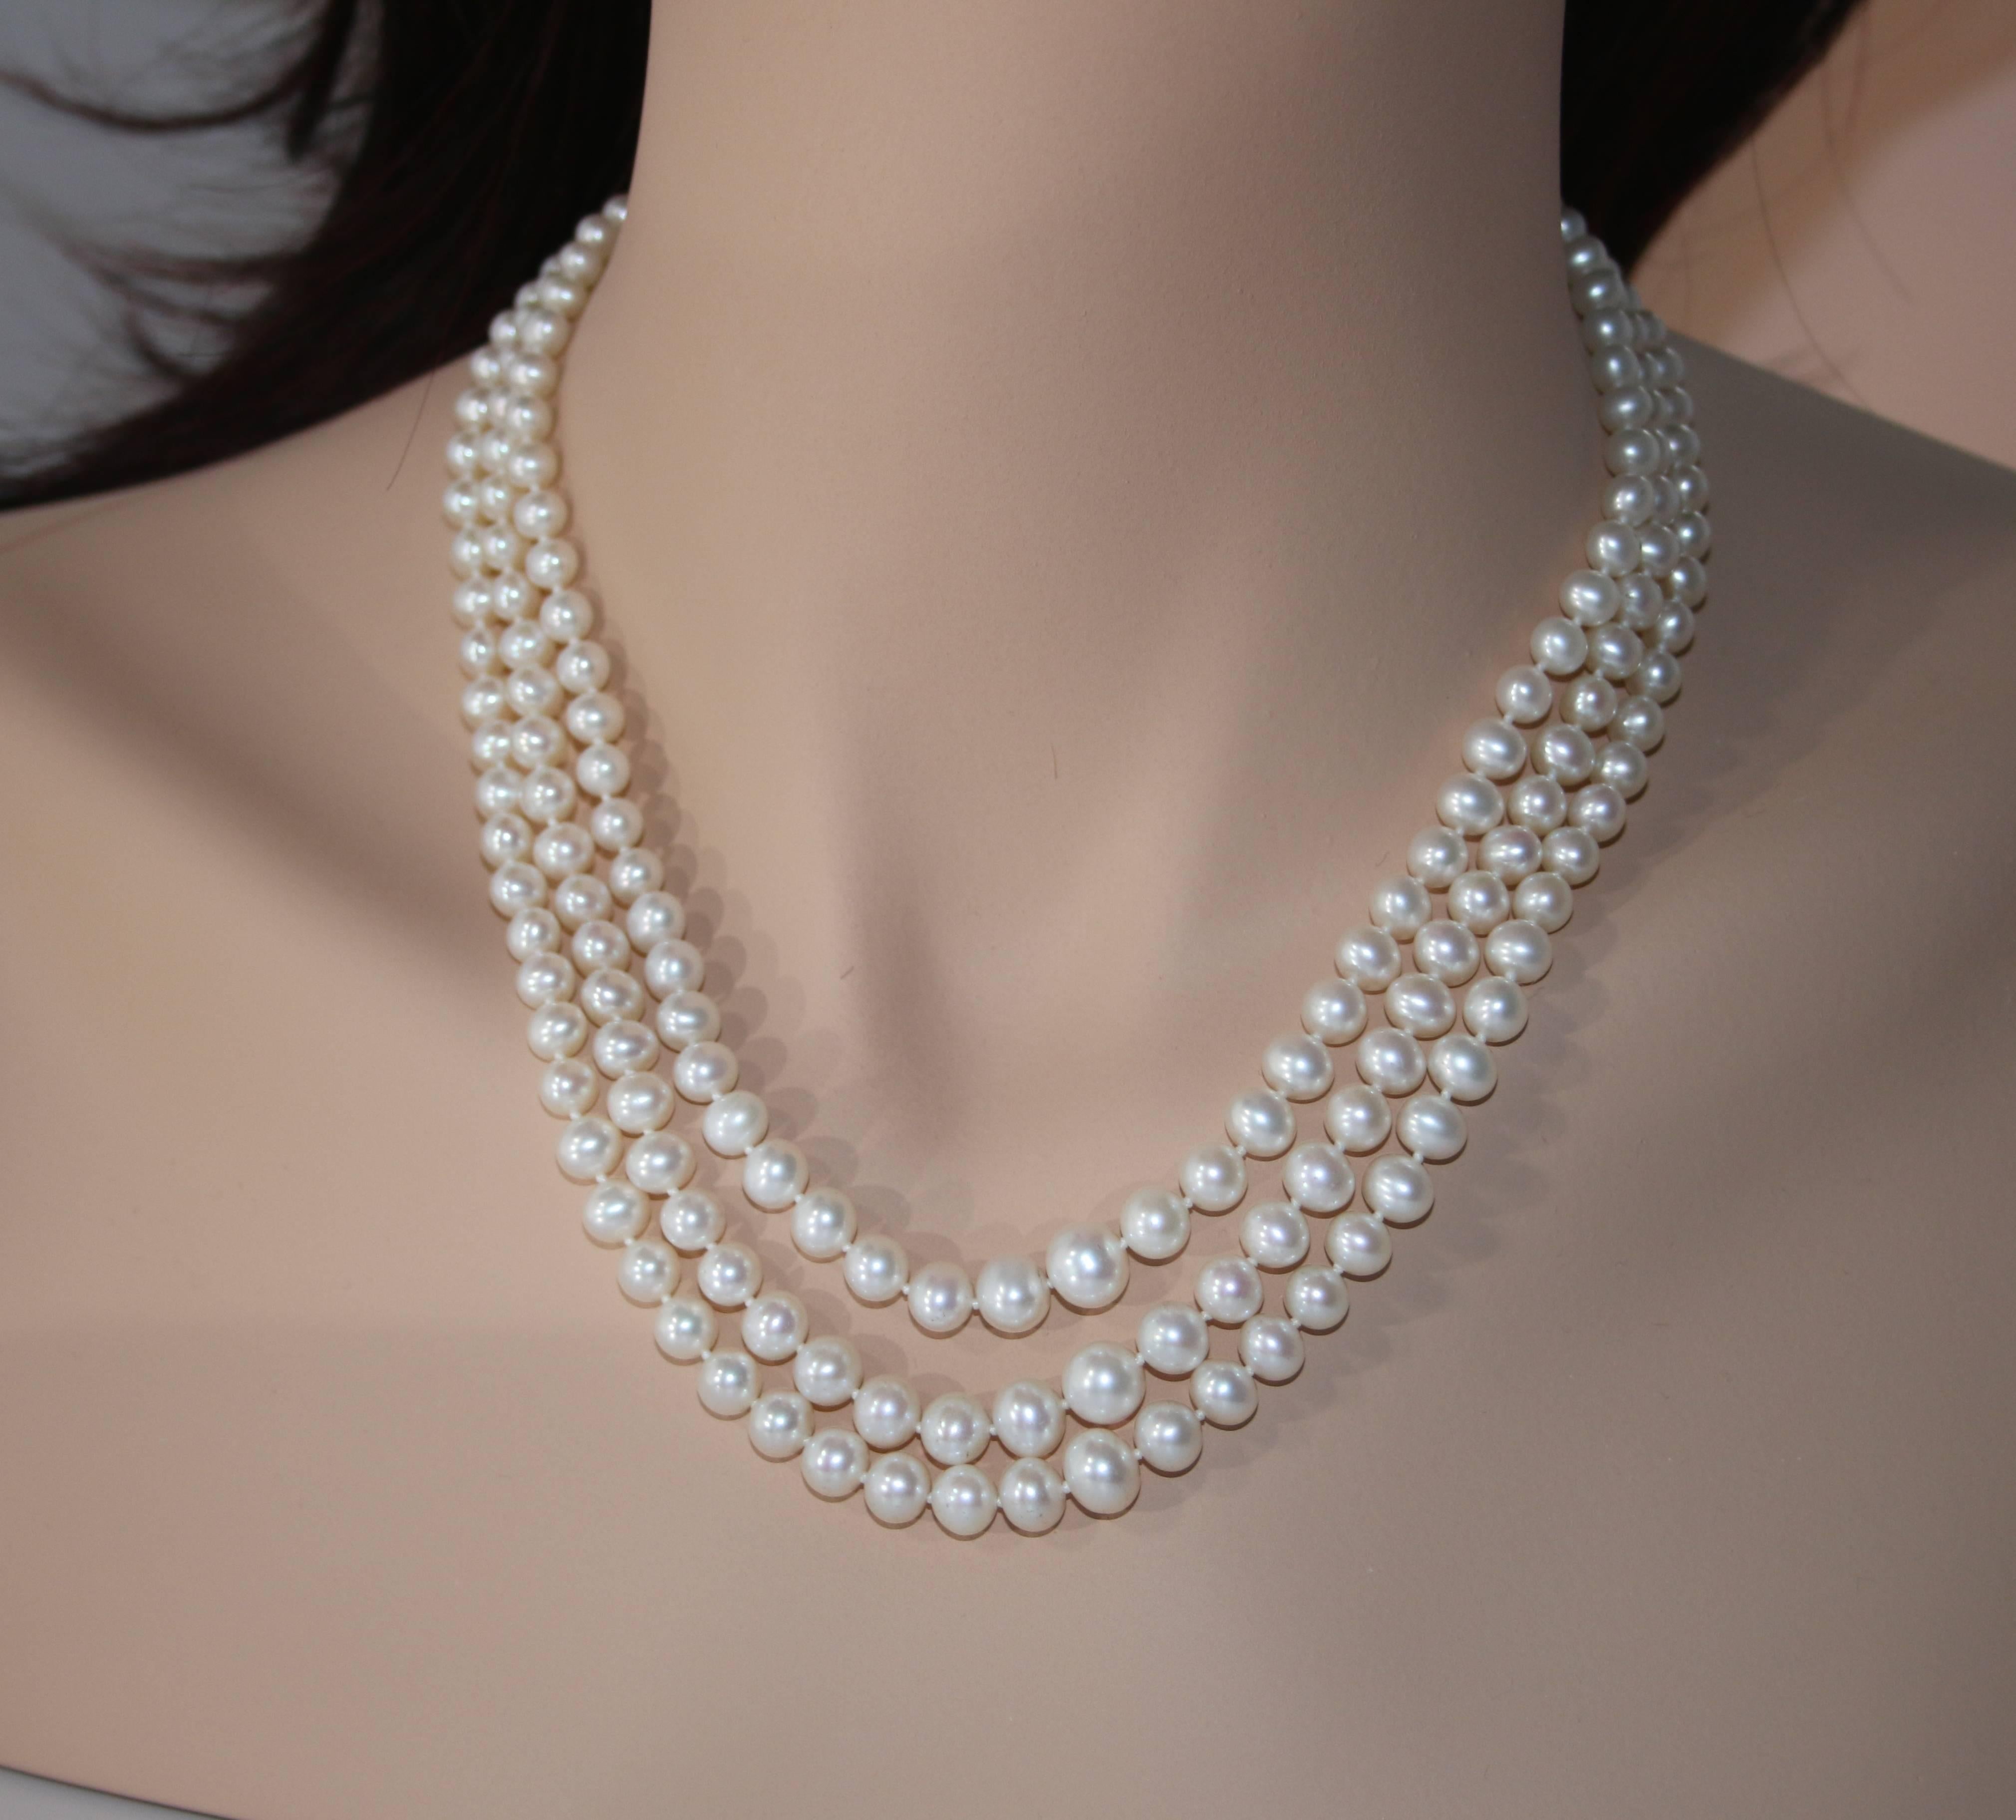 3 strand cultured pearl necklace